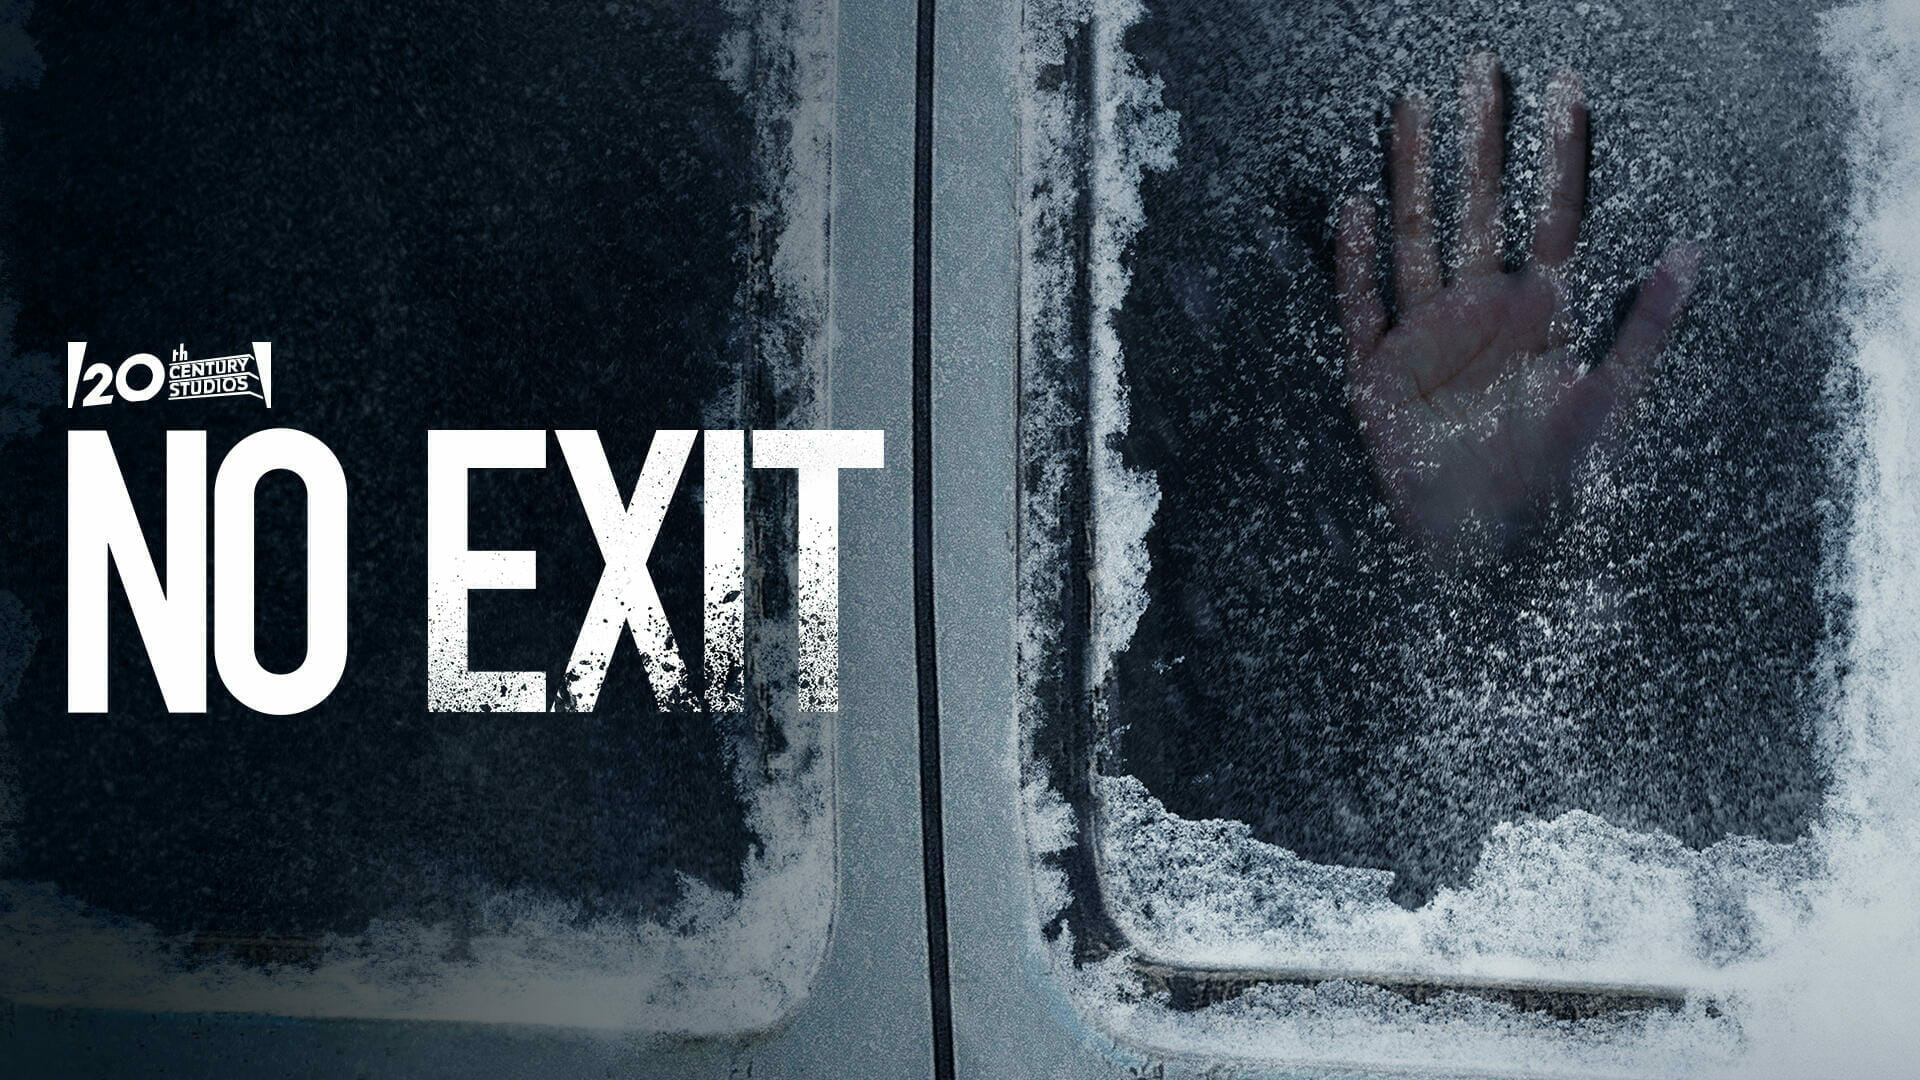 No Exit movie, Film review, Streaming recommendation, Must-watch or skip?, 1920x1080 Full HD Desktop